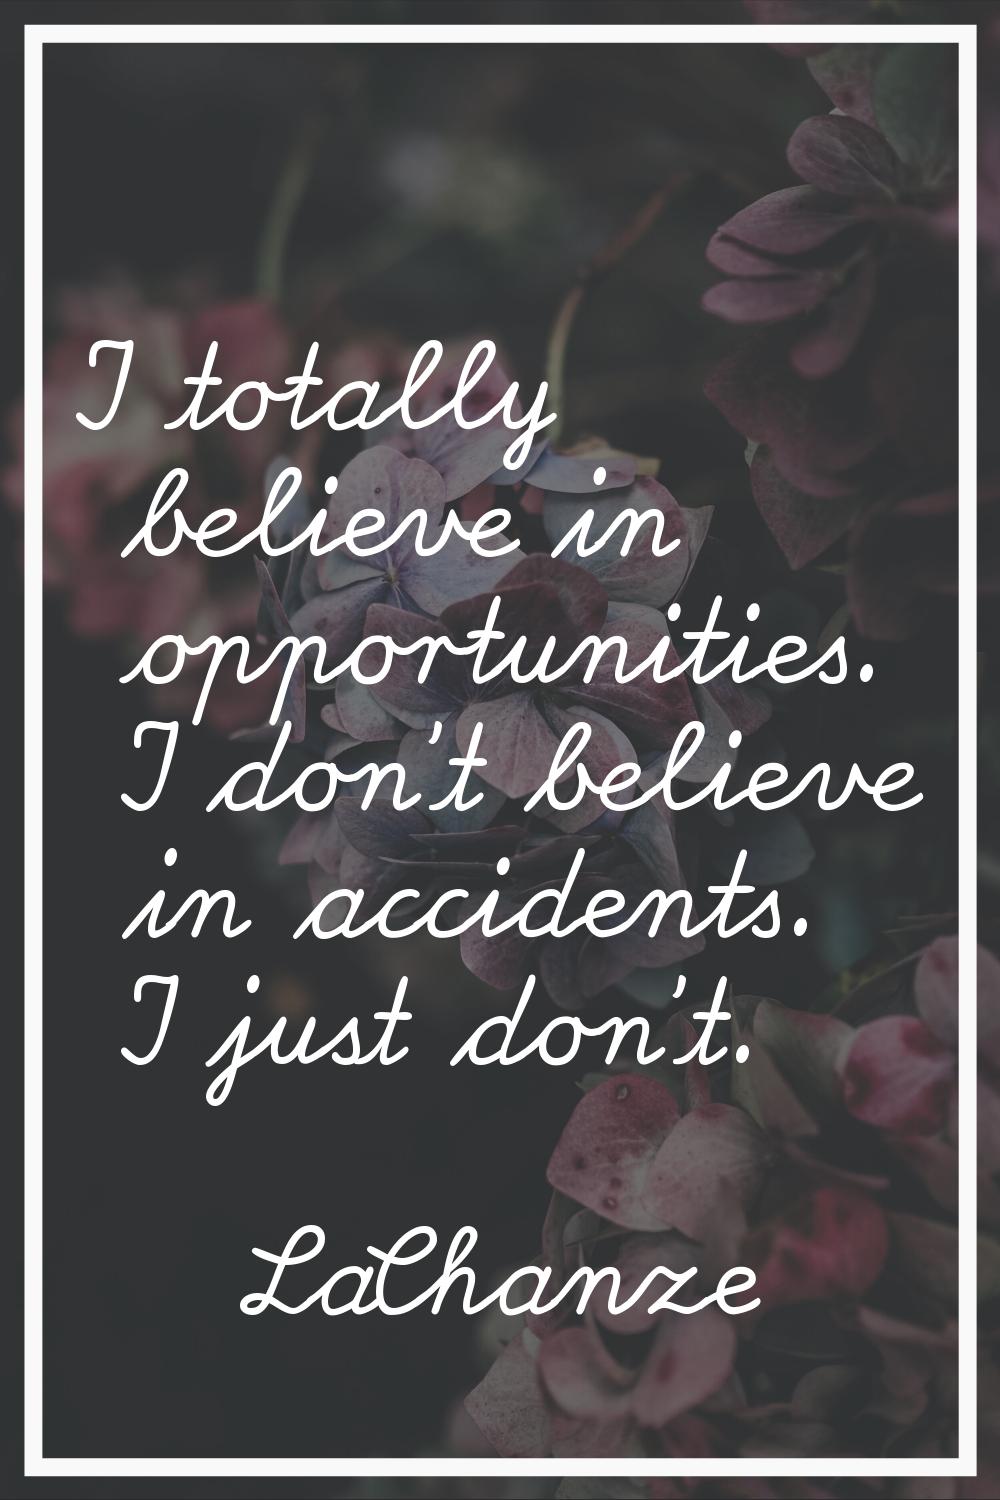 I totally believe in opportunities. I don't believe in accidents. I just don't.